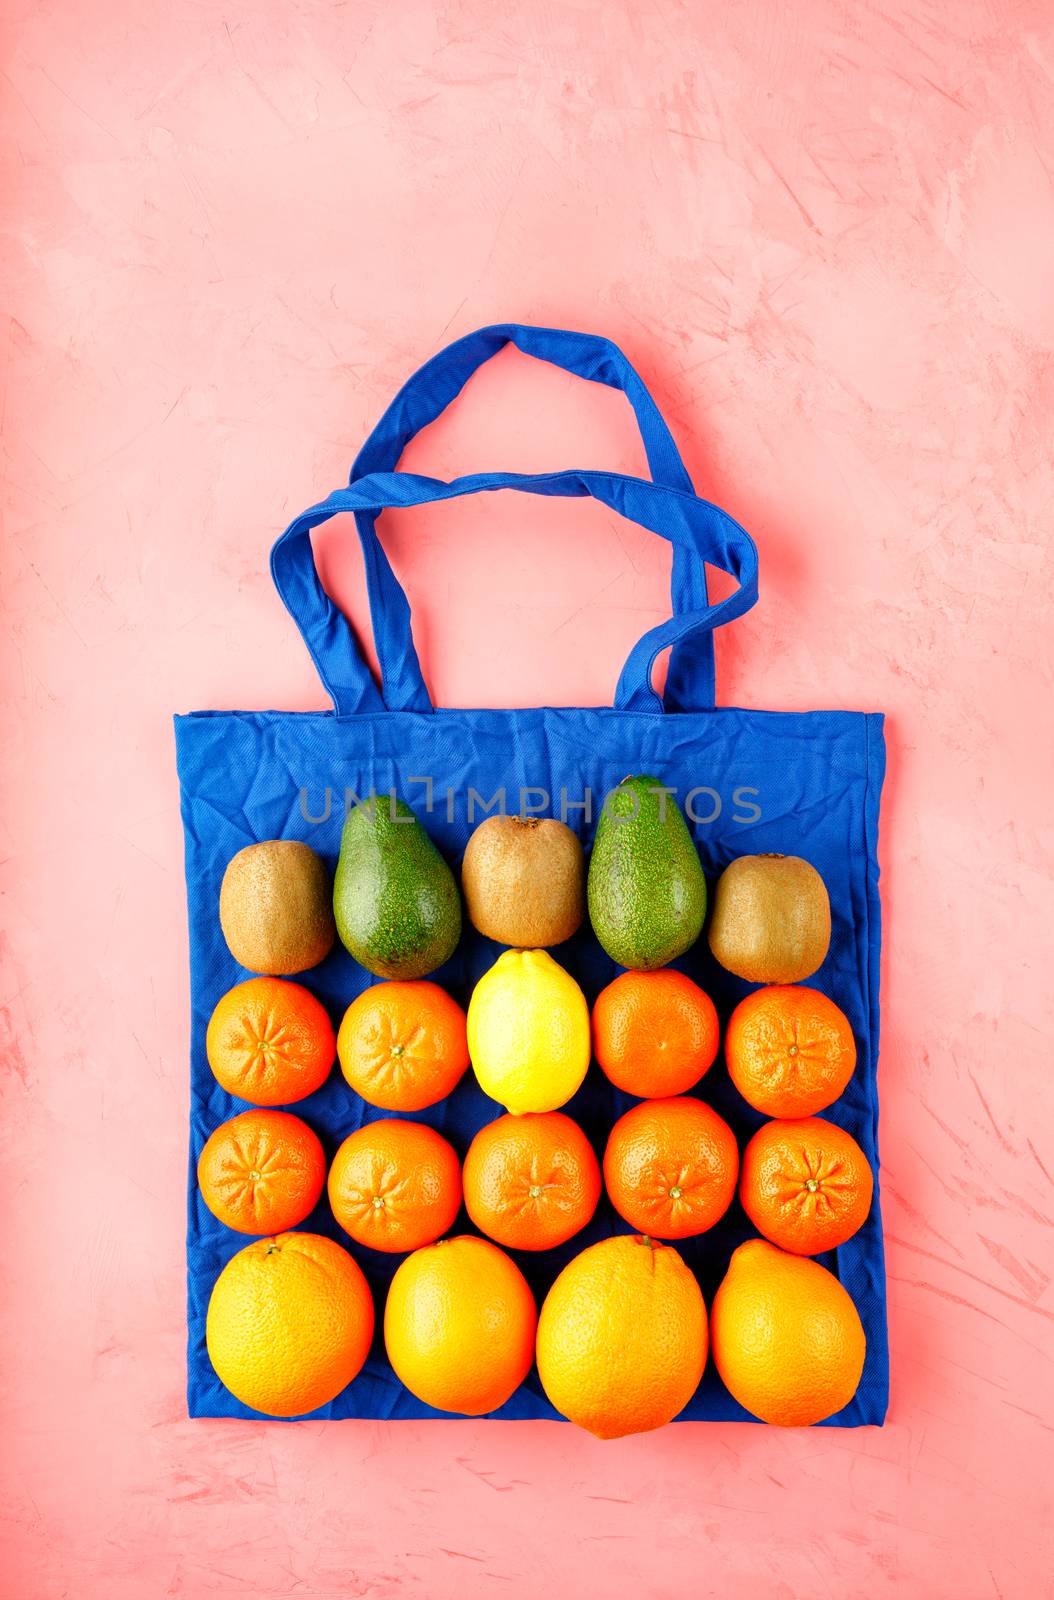 Zero waste concept, eco-friendly bag made of classic blue cotton on a pink background, no plastic, eco-friendly shops with fruits and vegetables, flat lay, copy space.